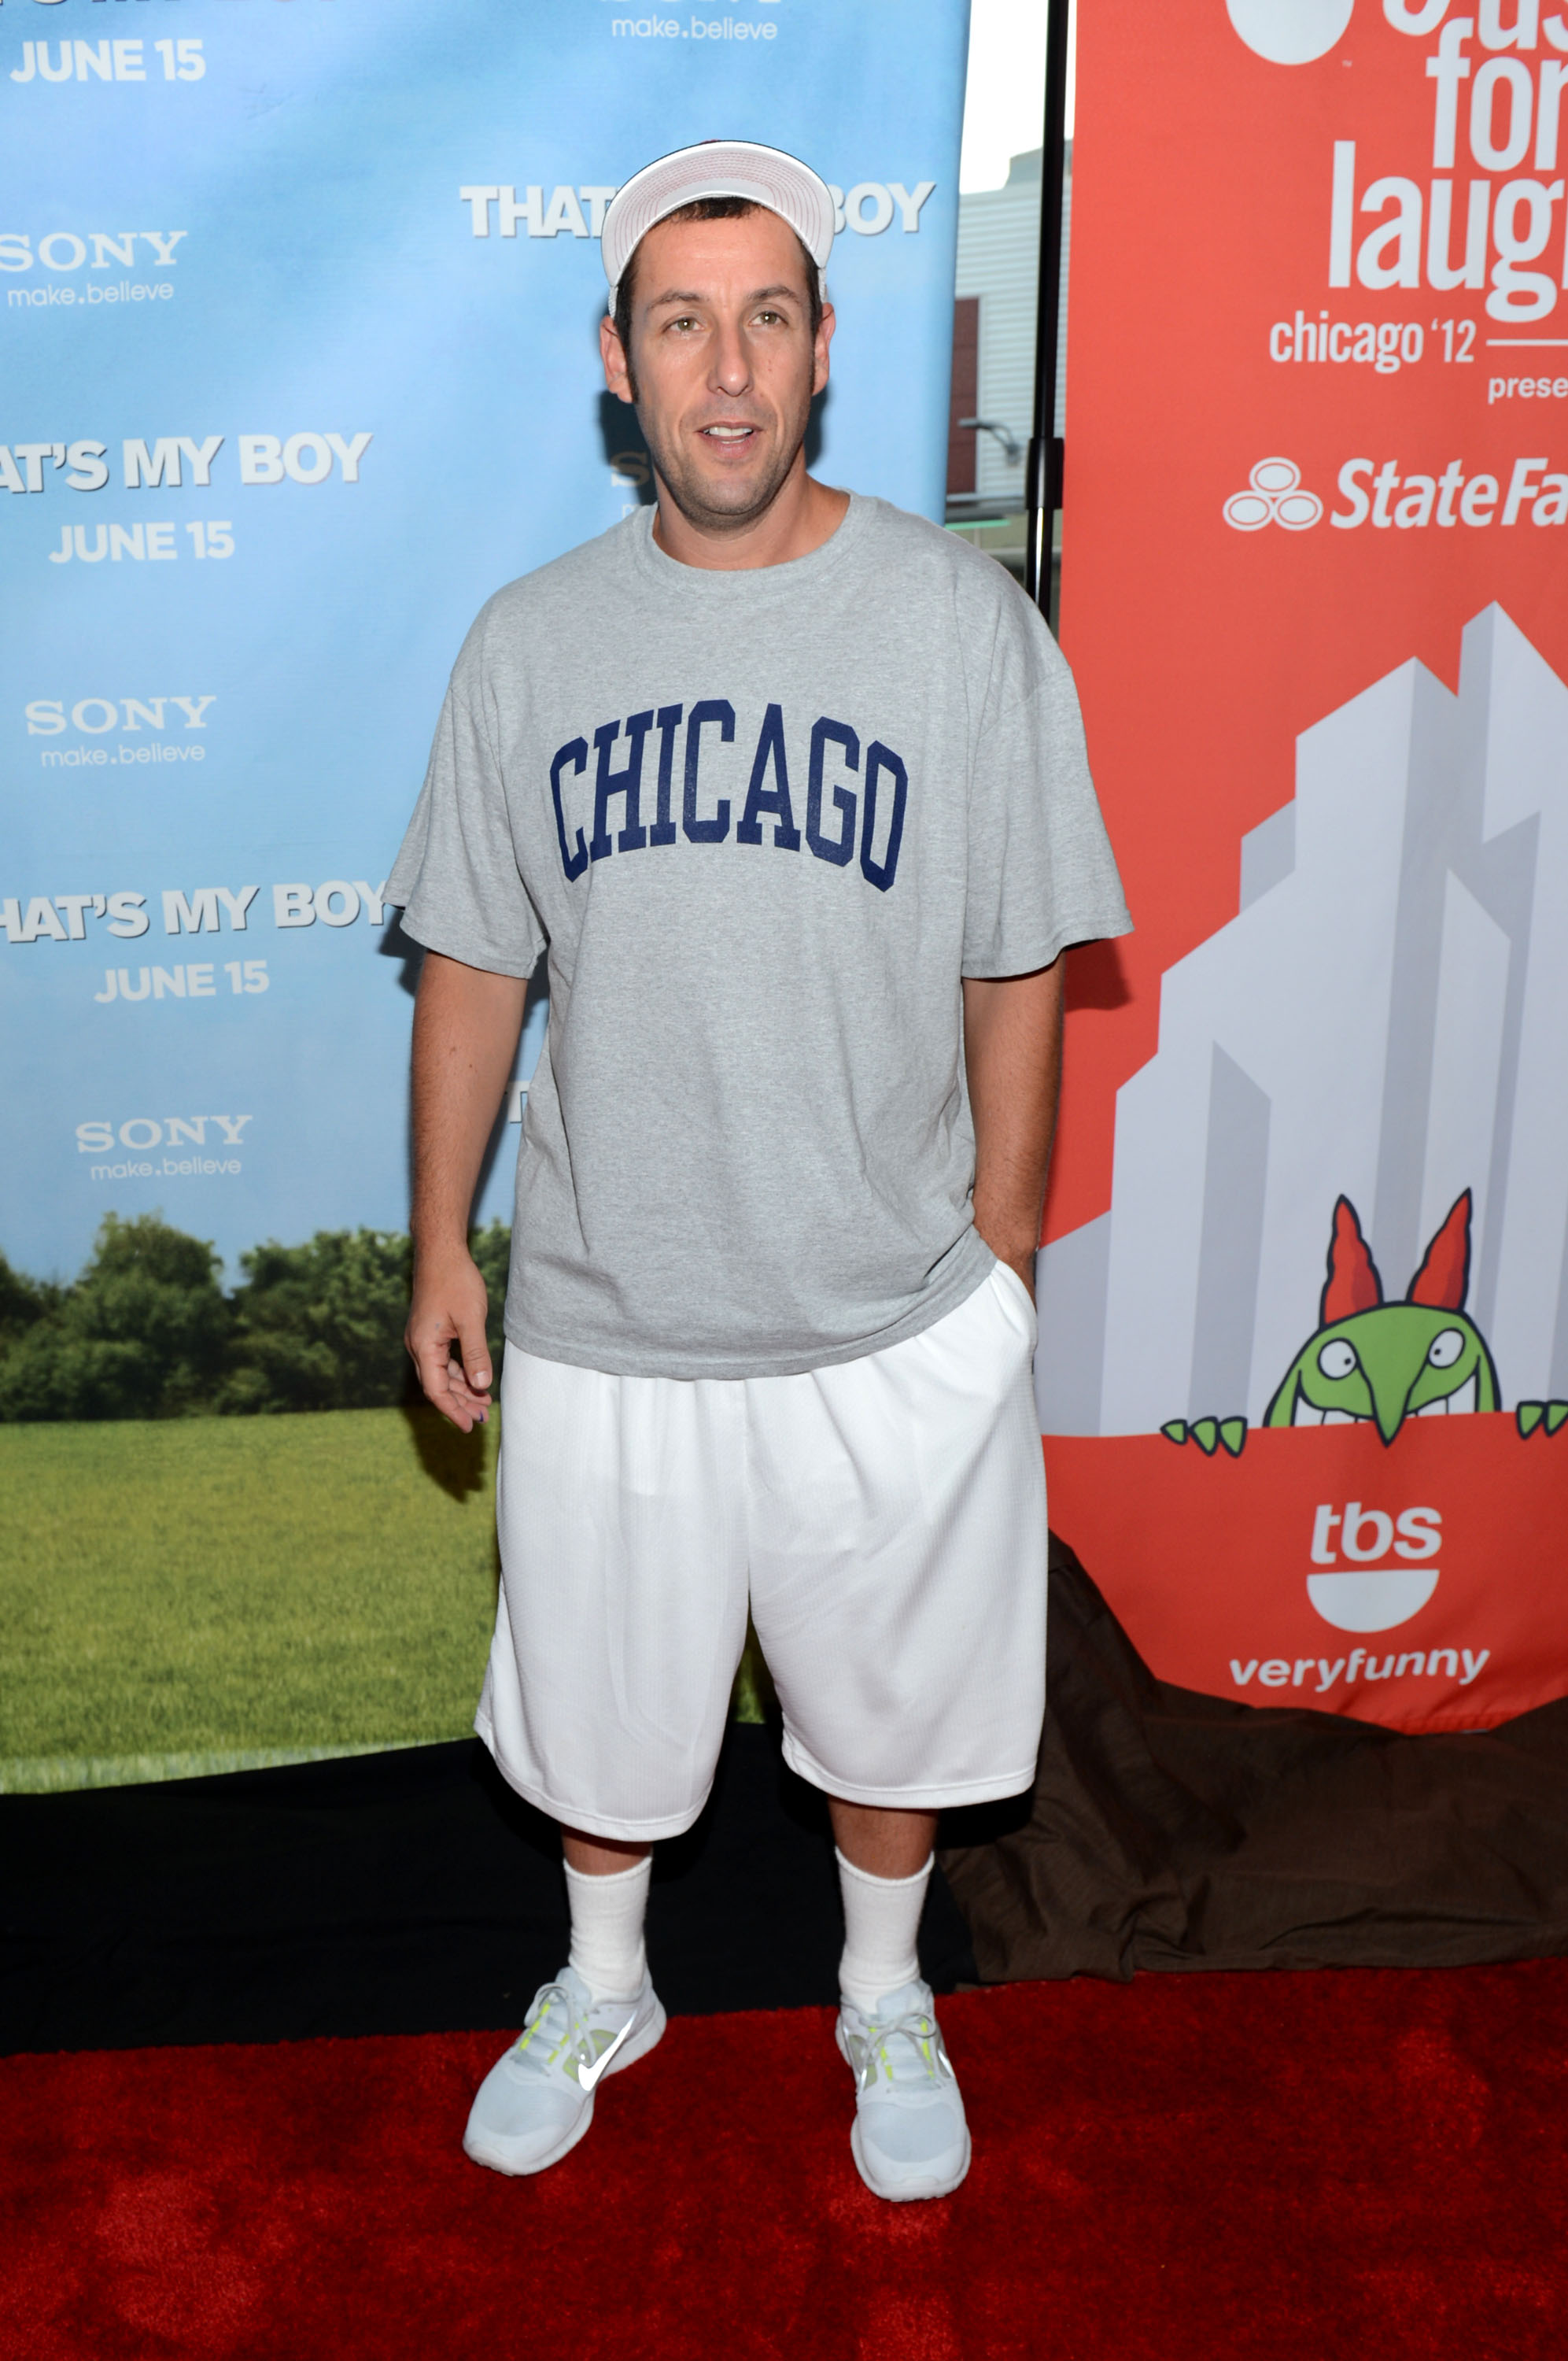 Adam Sandler in Chicago, Illinois on June 14, 2012 | Source: Getty Images